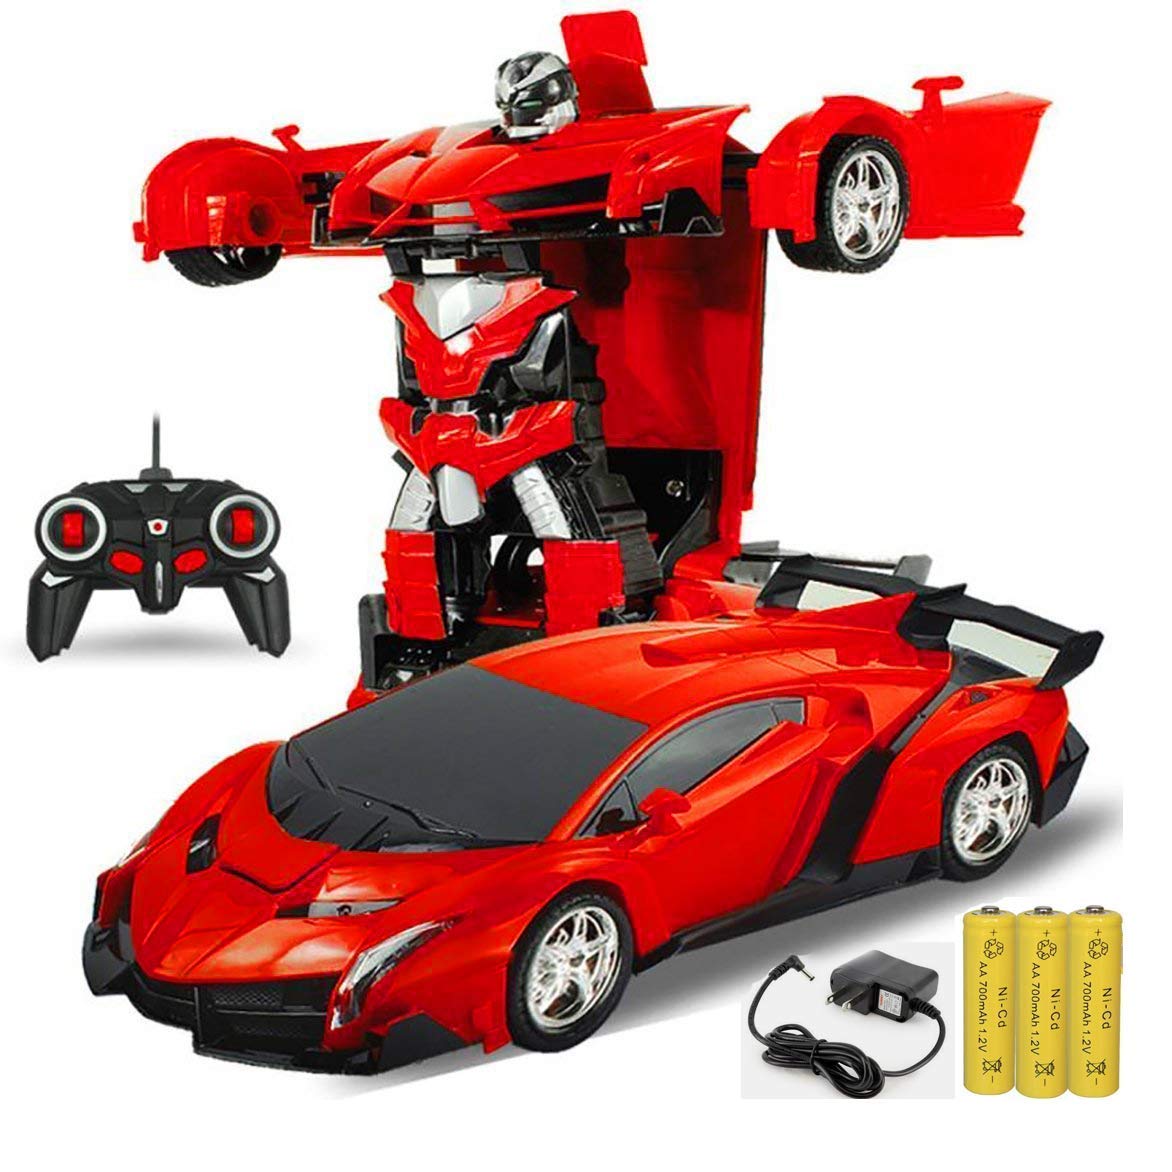 SUPER TOY Remote Control Convertible Transform Robot Car Toy for Boys RC Sports Model Car to Robot Deformation Toy with LED Light and Rechargeable Battery for Kids Birthday Gift (Multicolor)